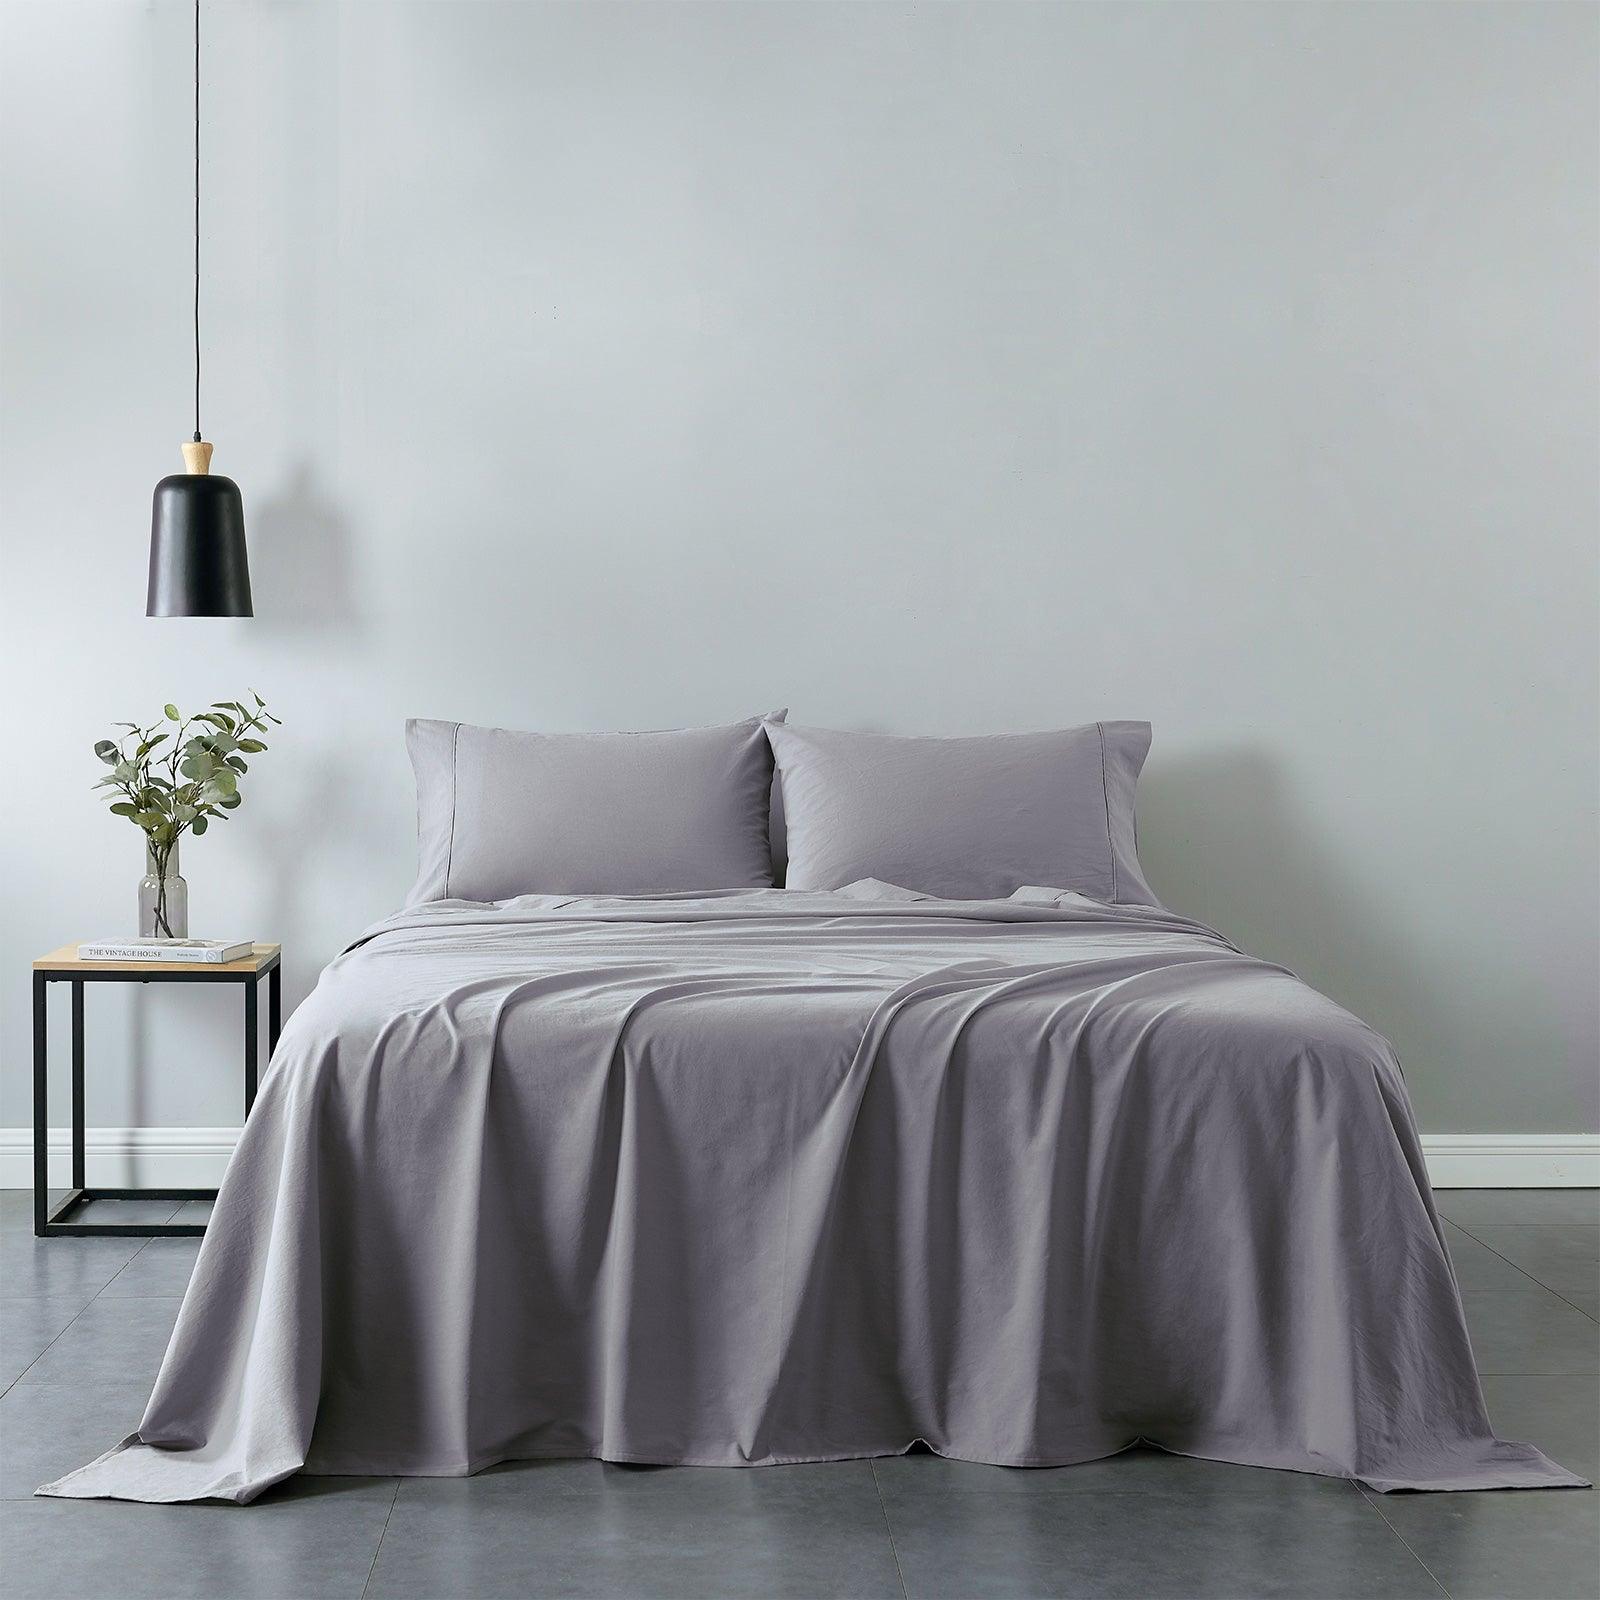 Royal Comfort Vintage Washed 100% Cotton Sheet Set Fitted Flat Sheet Pillowcases - Single - Grey